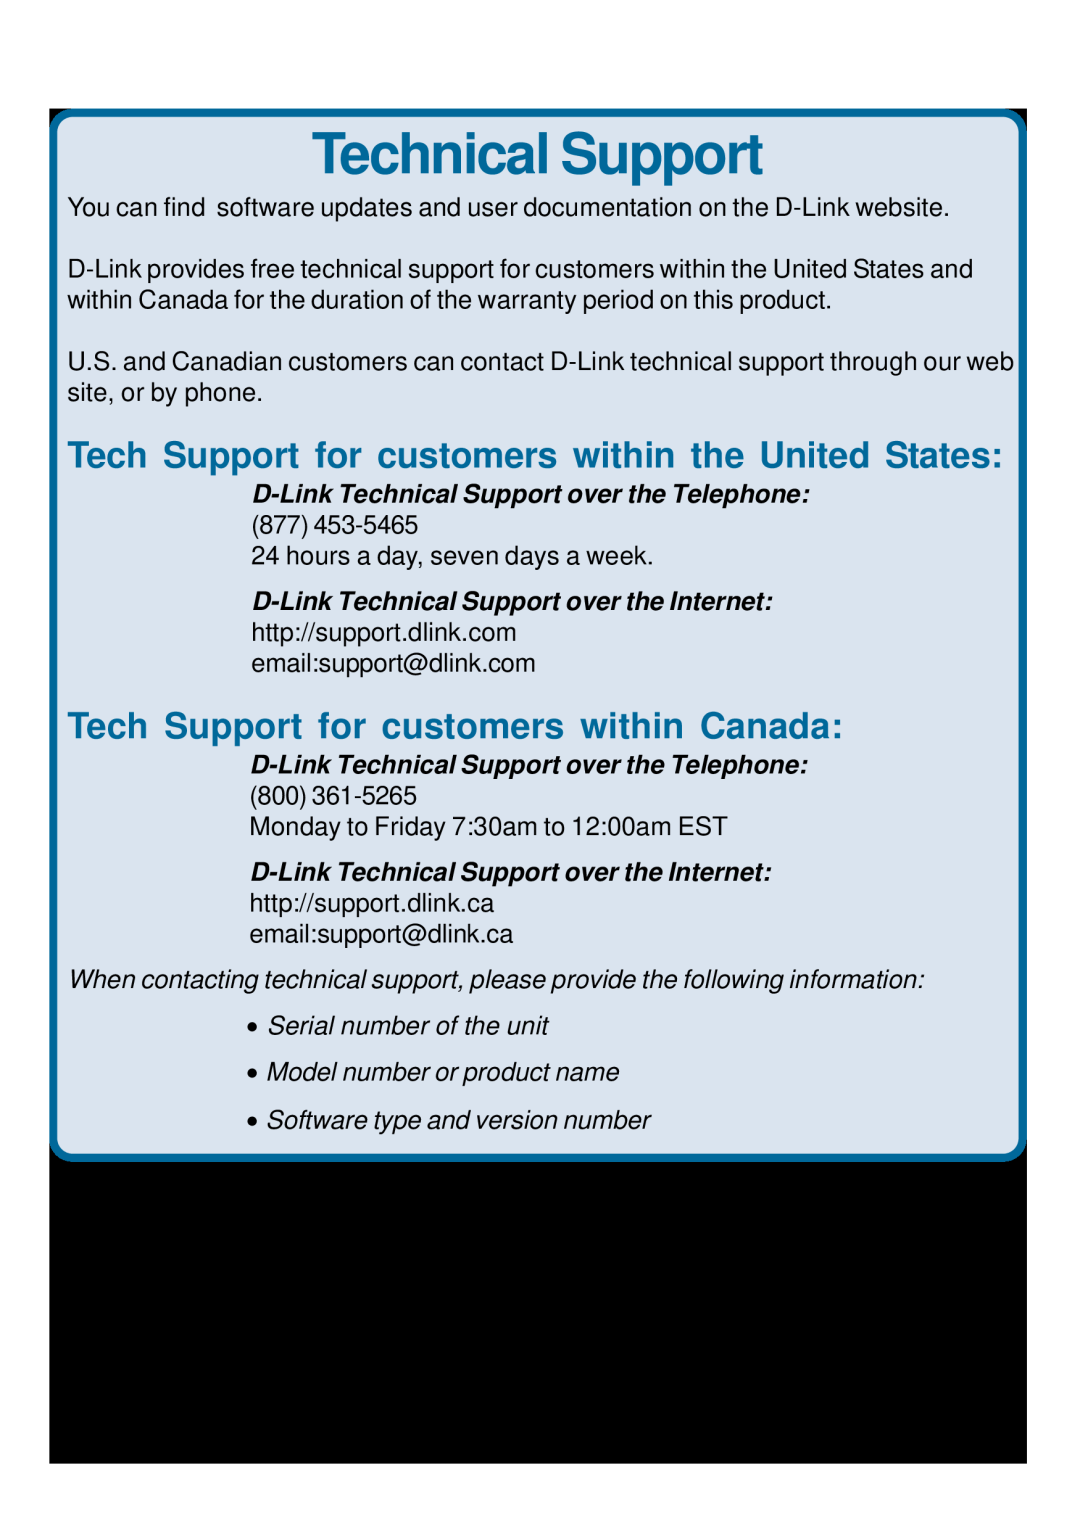 D-Link DI-714 Technical Support, Tech Support for customers within the United States, Software type and version number 